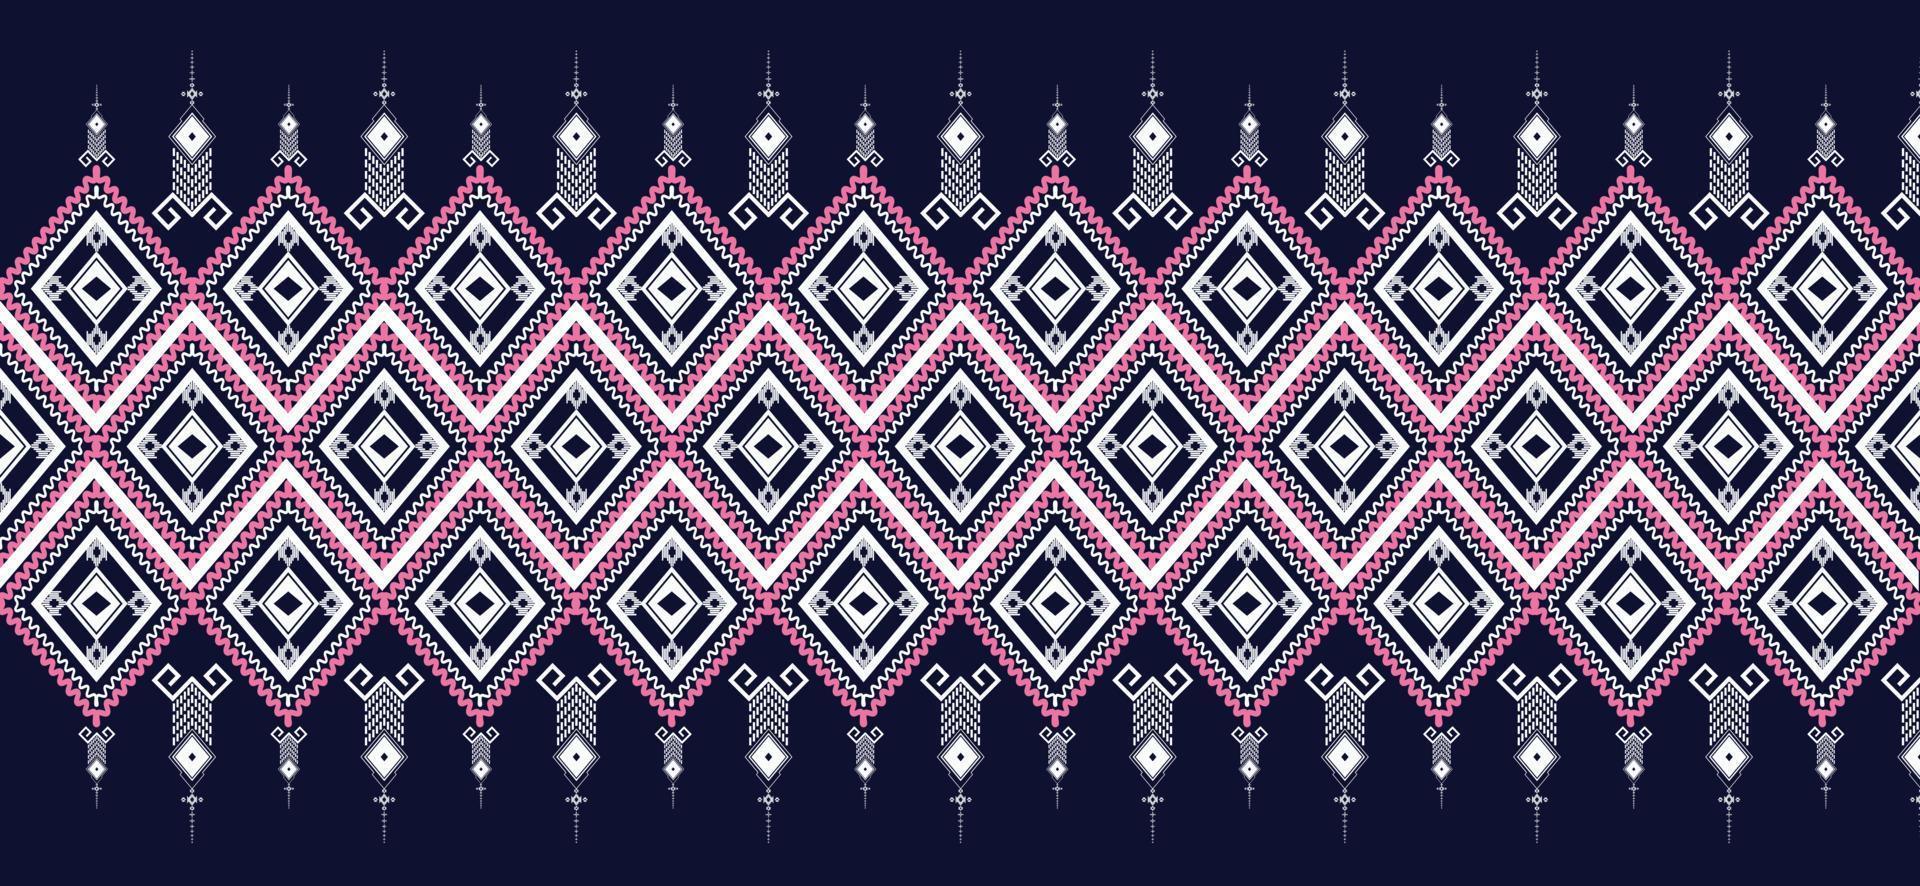 A traditional geometric ethnic pattern design, a TEXTURE used for skirt, carpet, wallpaper, clothing, wrapping, Batik, fabric, clothes, Fashion, shirt, and  Vector illustration